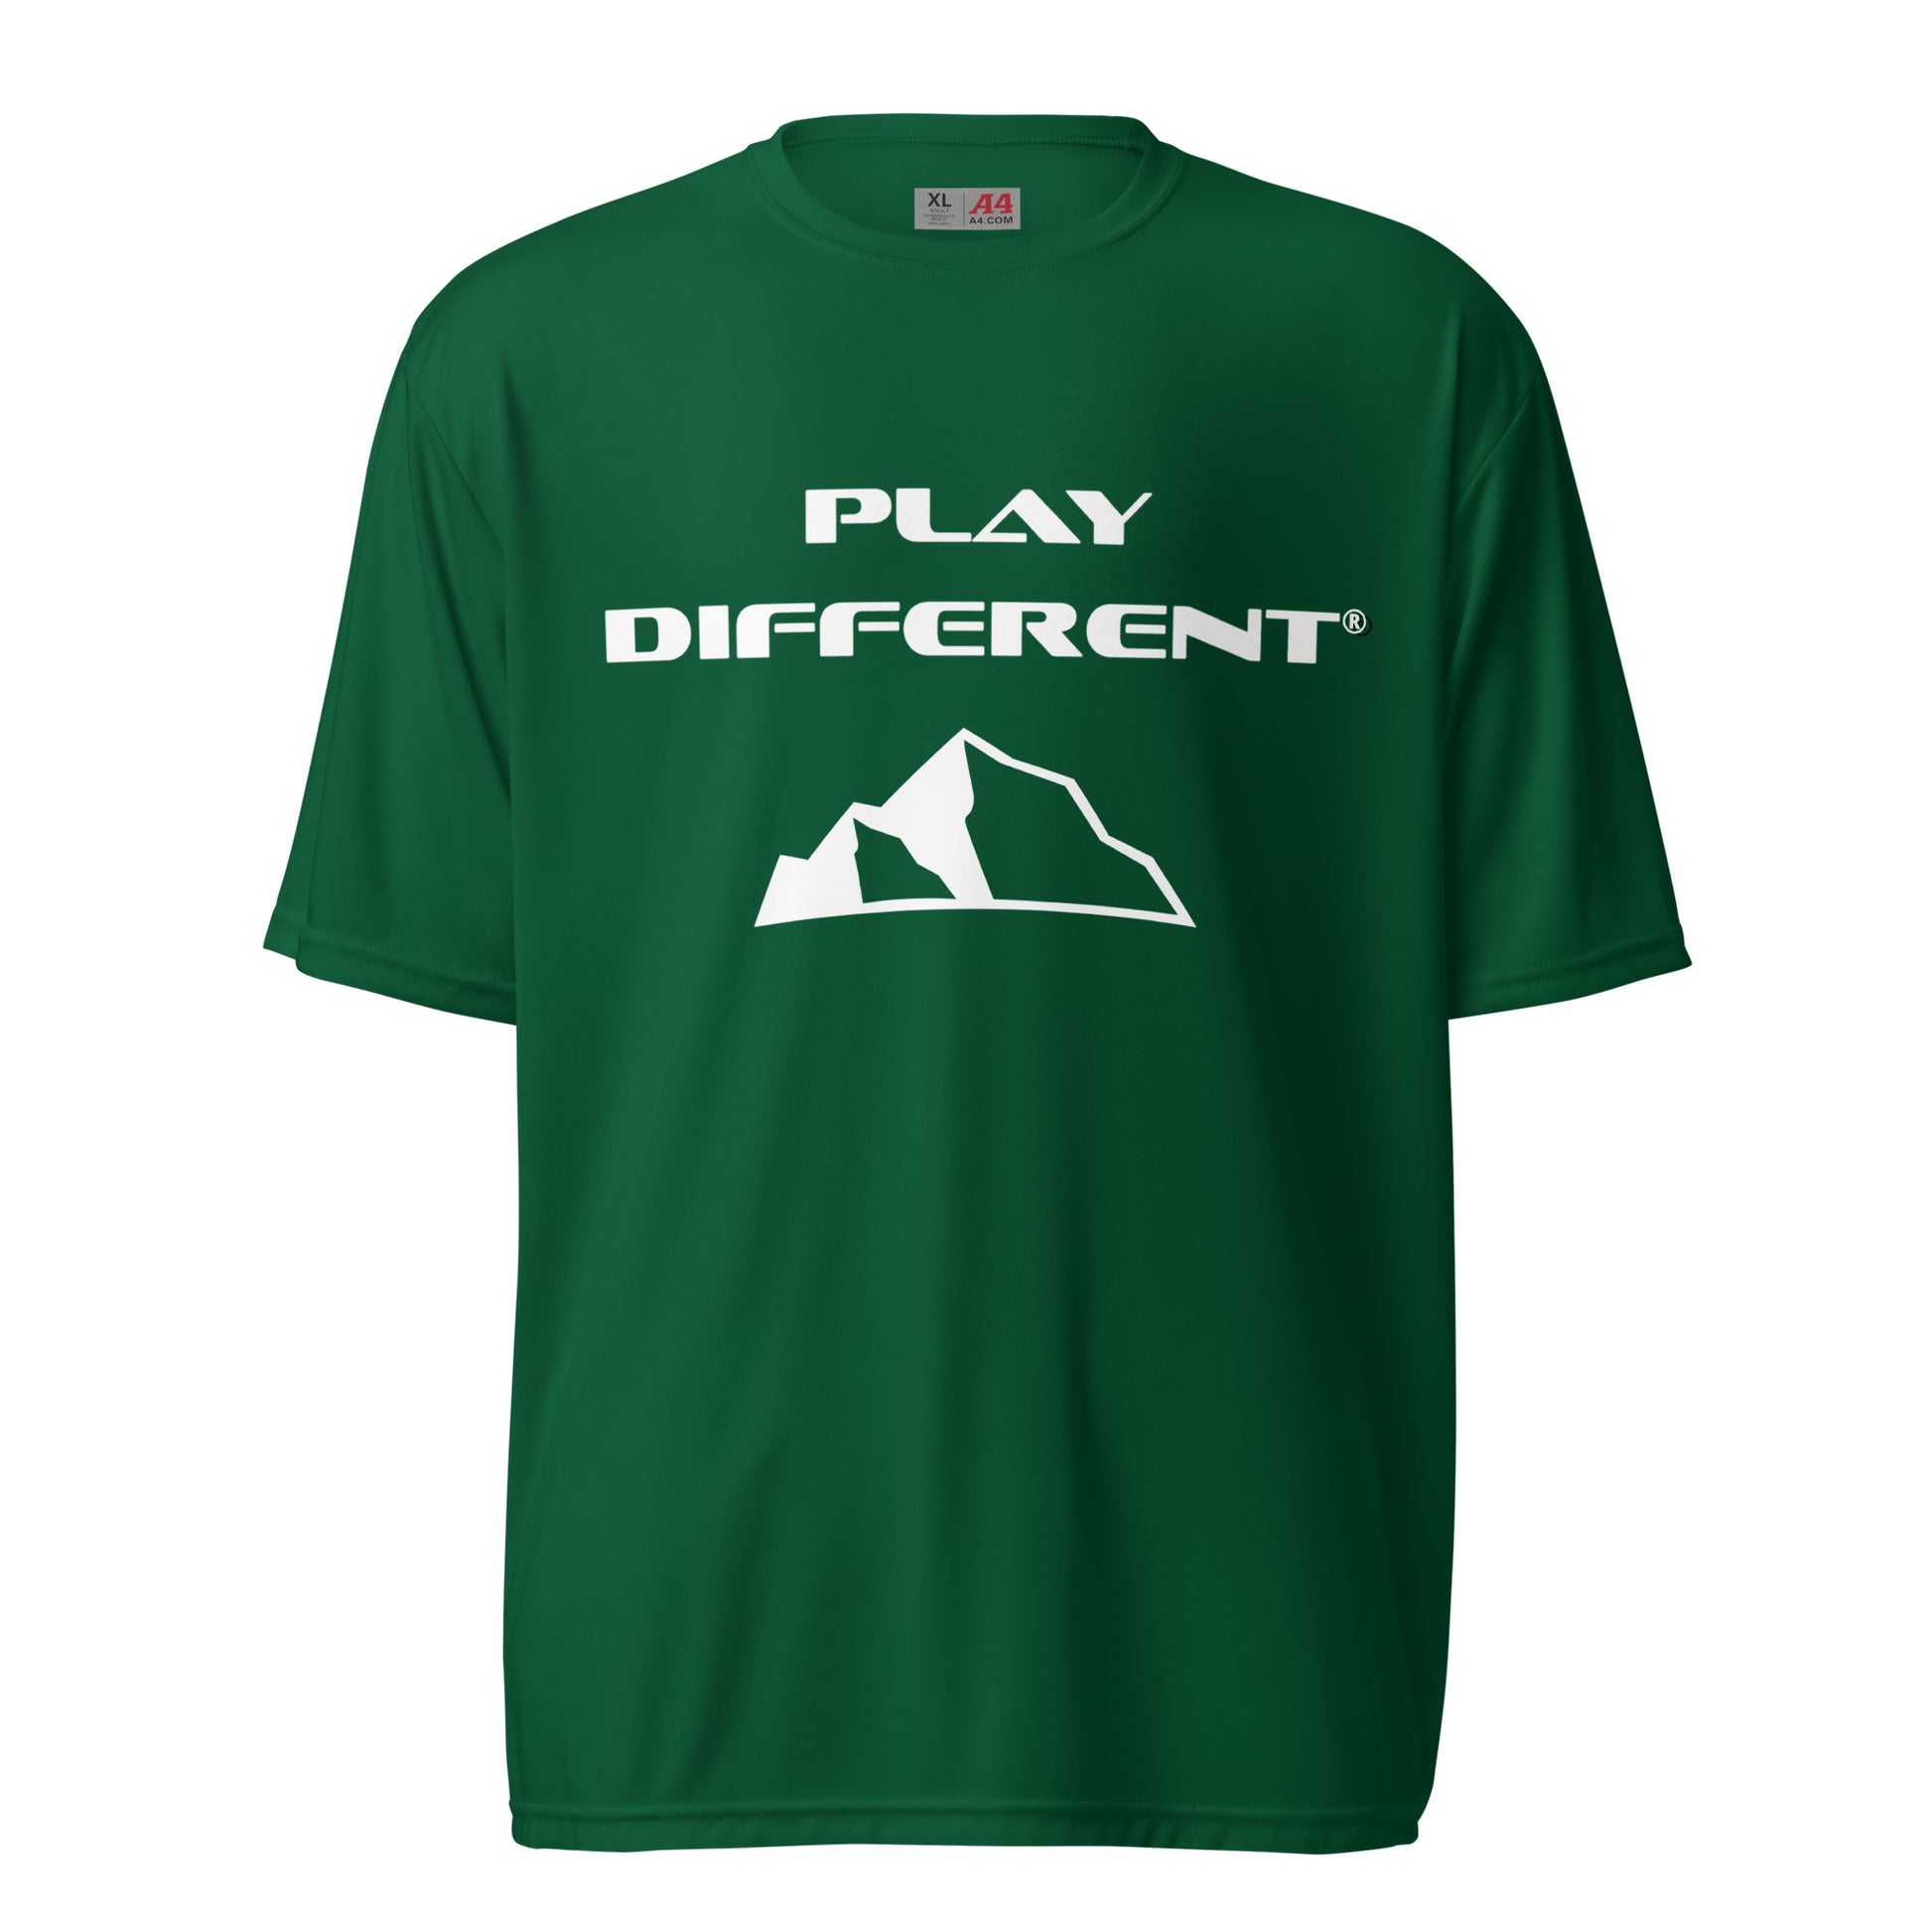 Play Different® Unisex performance crew neck t-shirt forest green